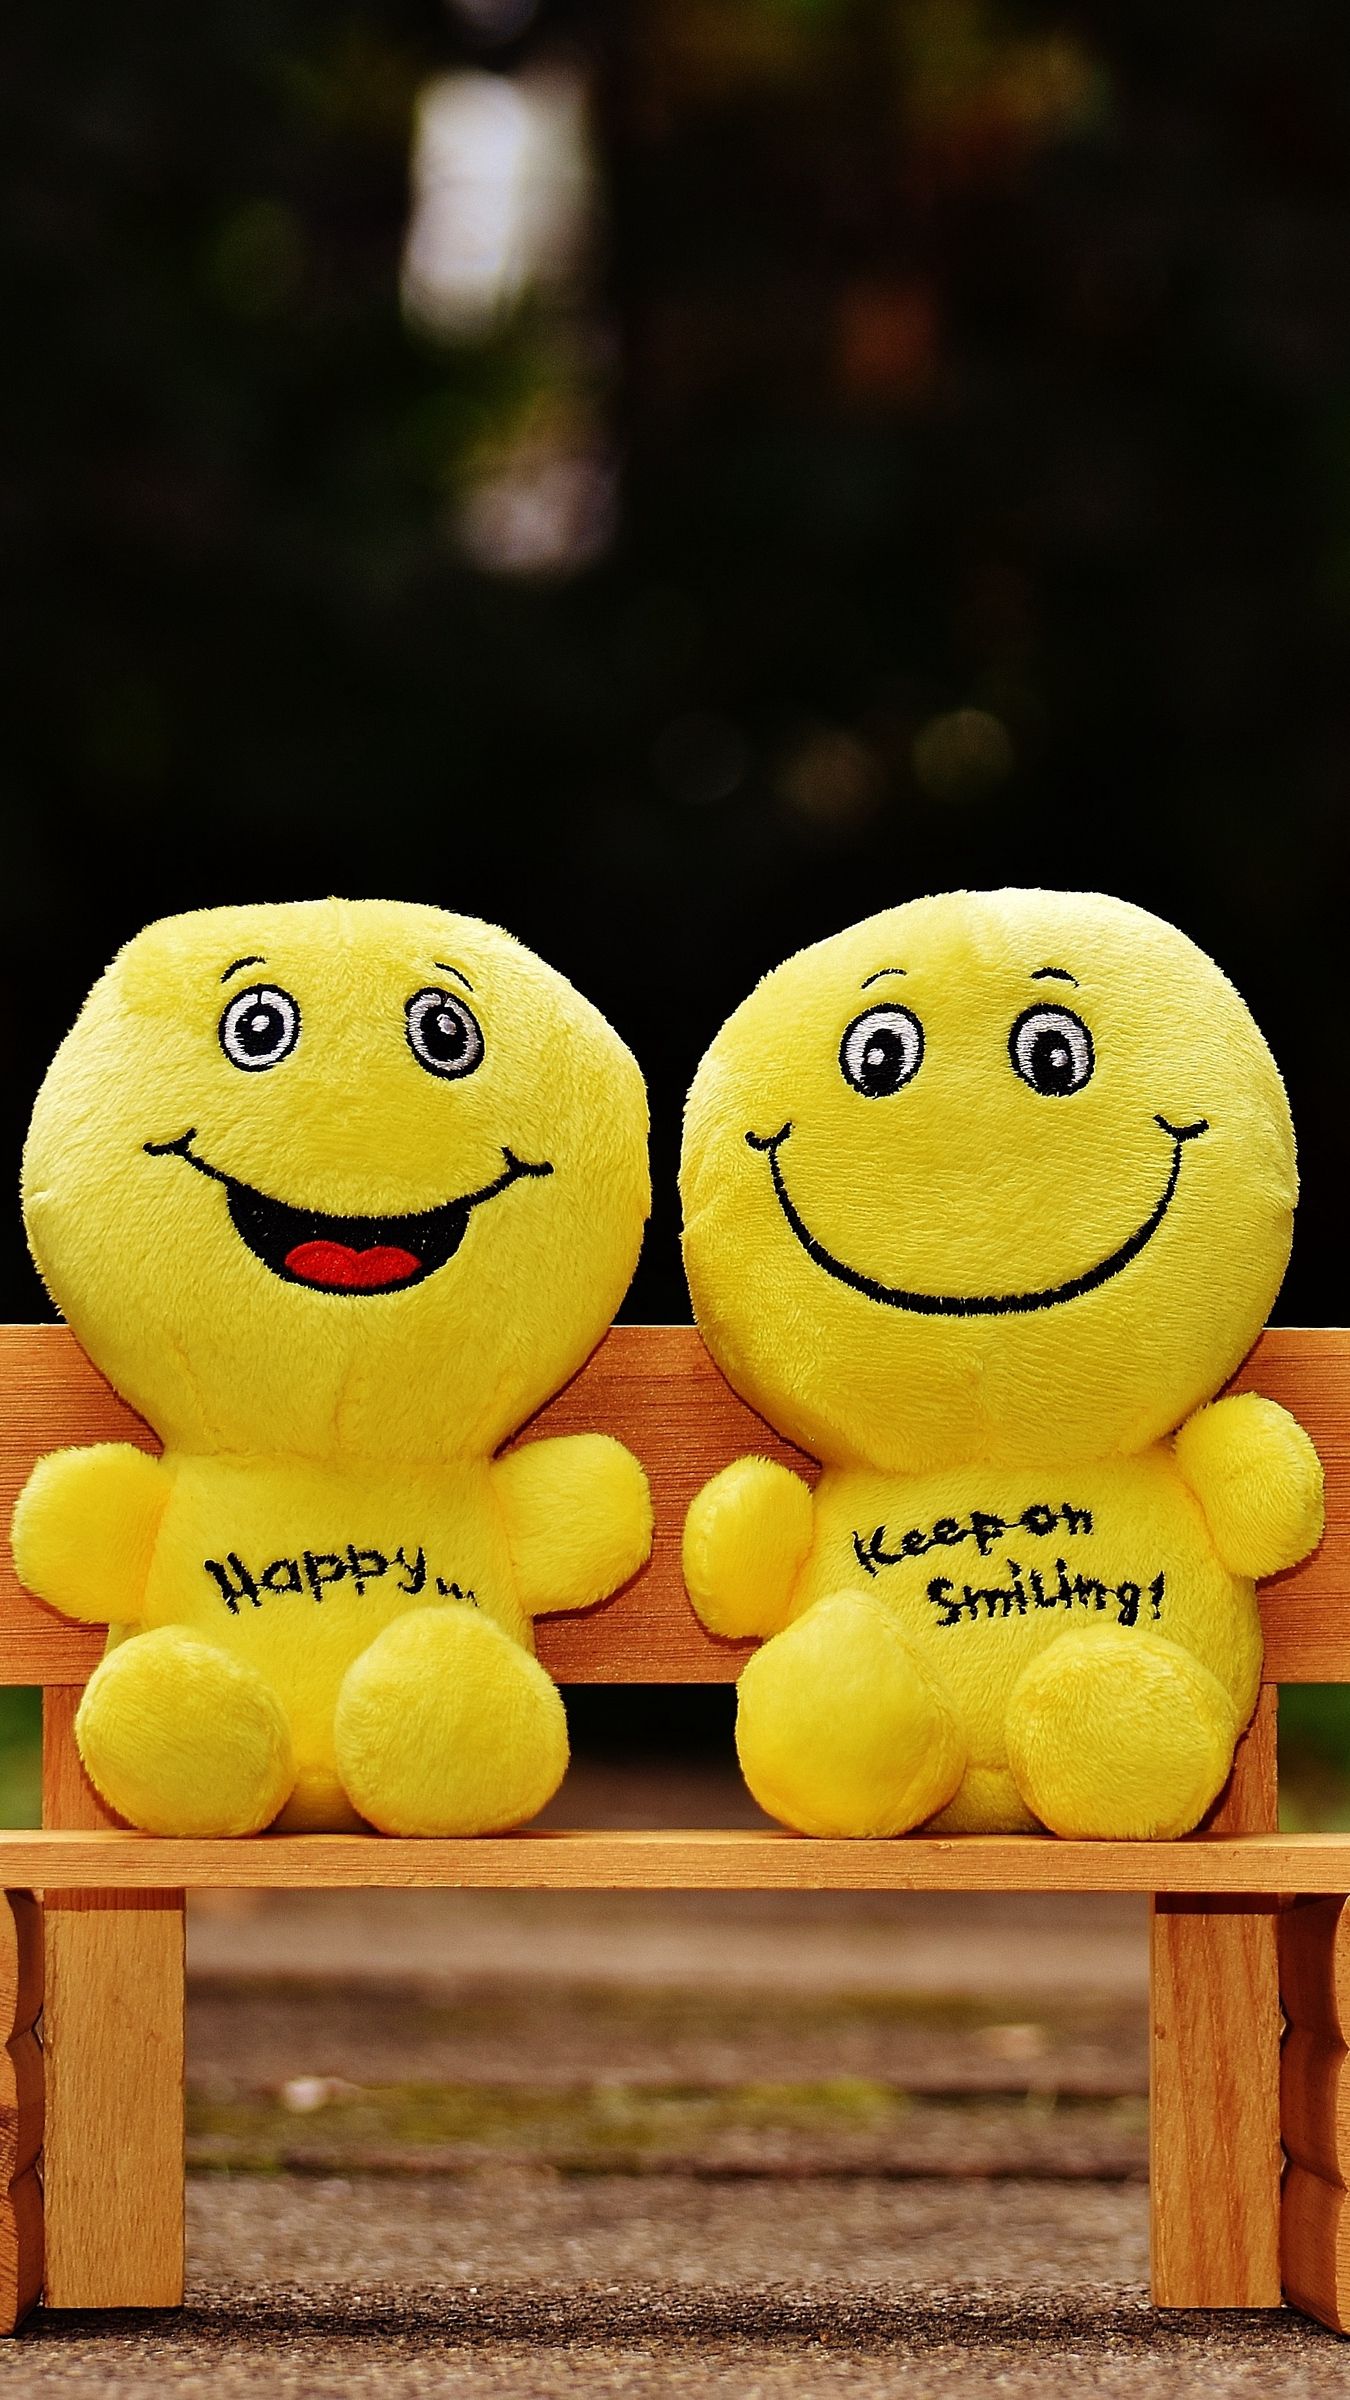 Happy Yellow Smiley Faces  Yellow smiley face Cute backgrounds Happy  smiley face